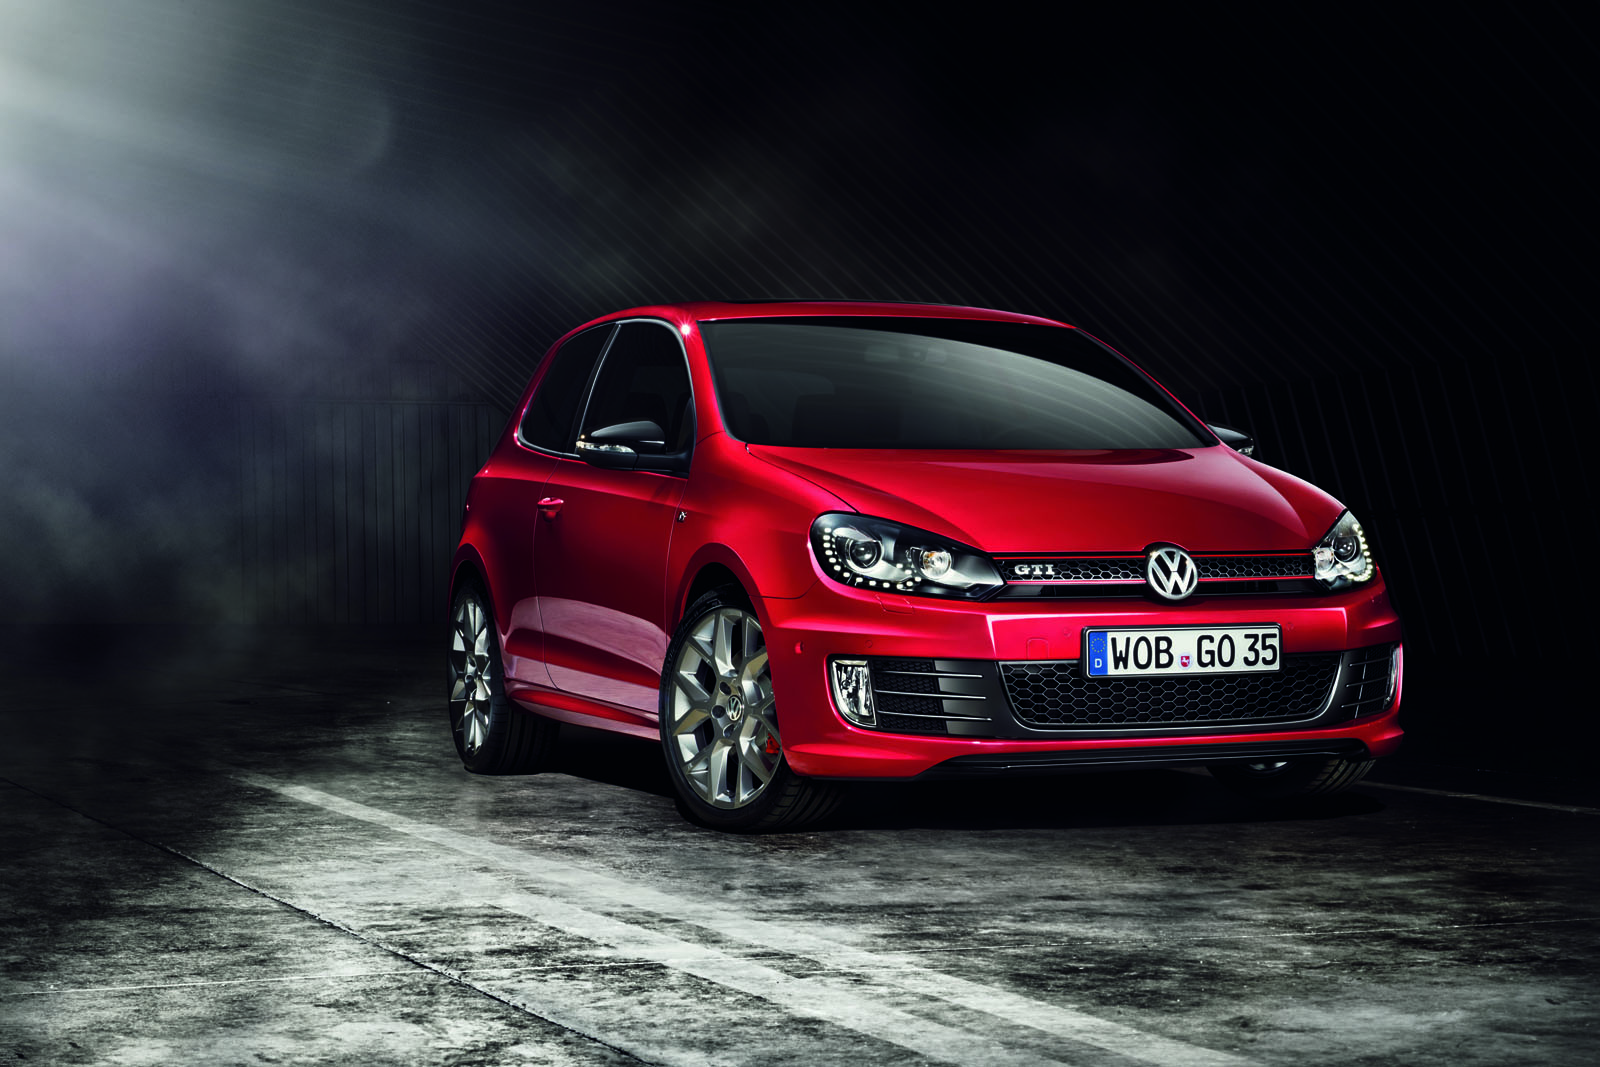 New Volkswagen Golf GTI Edition 35 Comes with 235-Horsepower